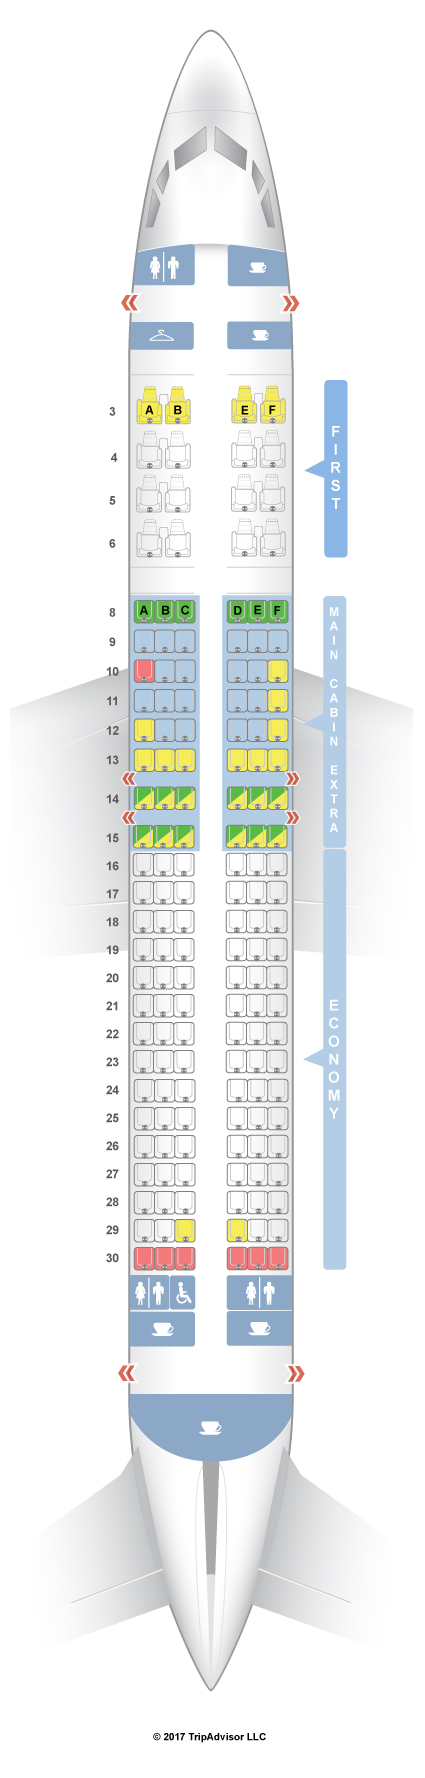 American Airlines Flight 723 Seating Chart